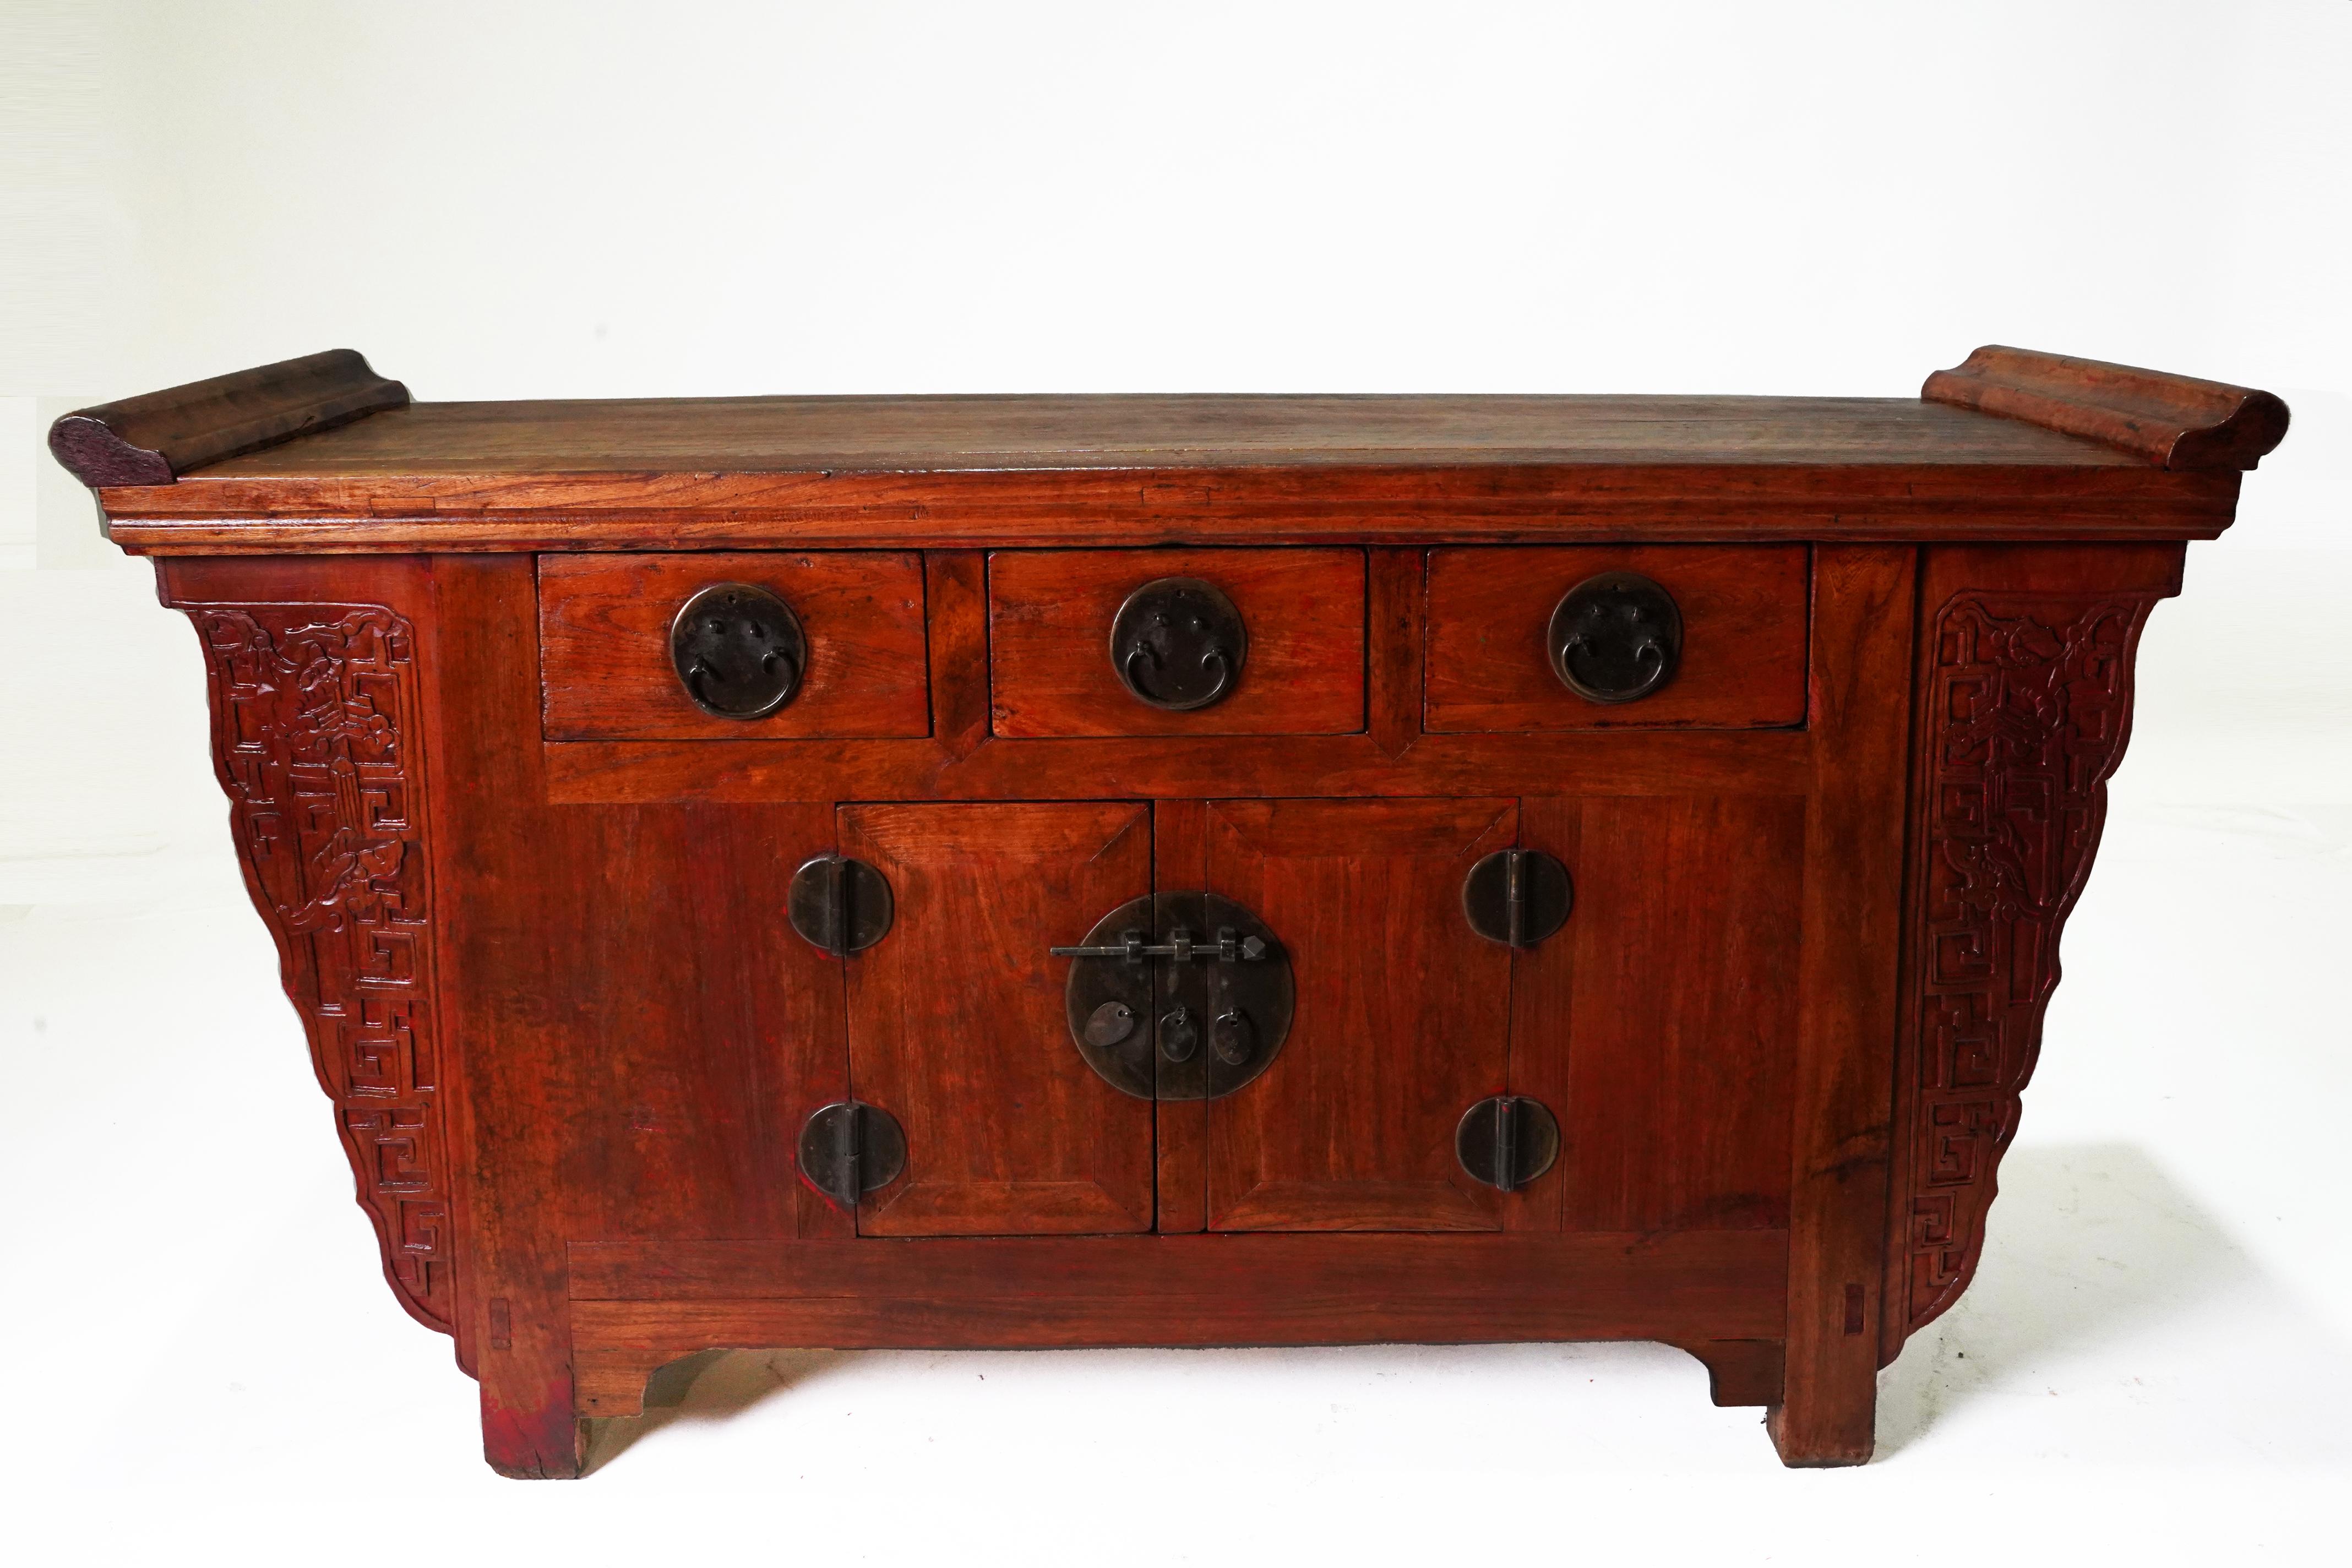 This is a classic example of a “Beijing” or Tianjin” sideboard, so-called because of their origin in this region of northeastern China. This compact chest has three drawers with two doors below. The center stile between the doors can be removed to